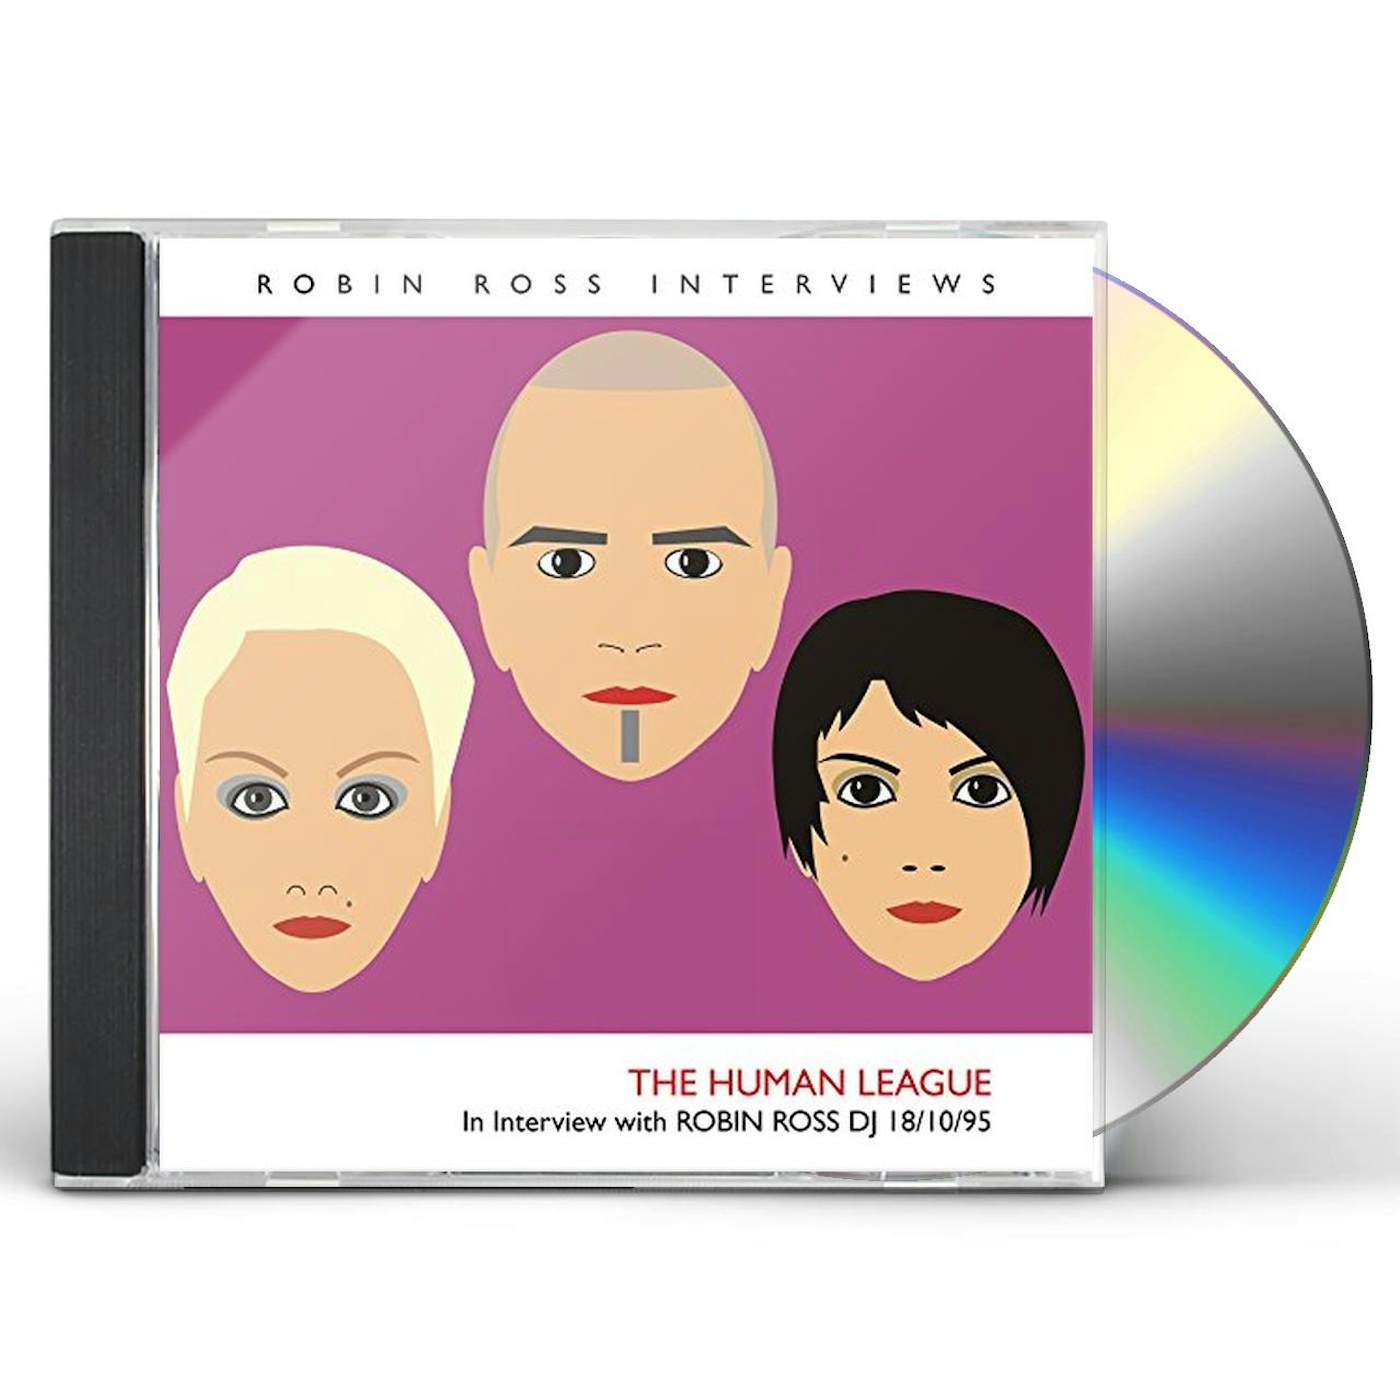 The Human League INTERVIEW WITH ROBIN ROSS 18/10/95 CD